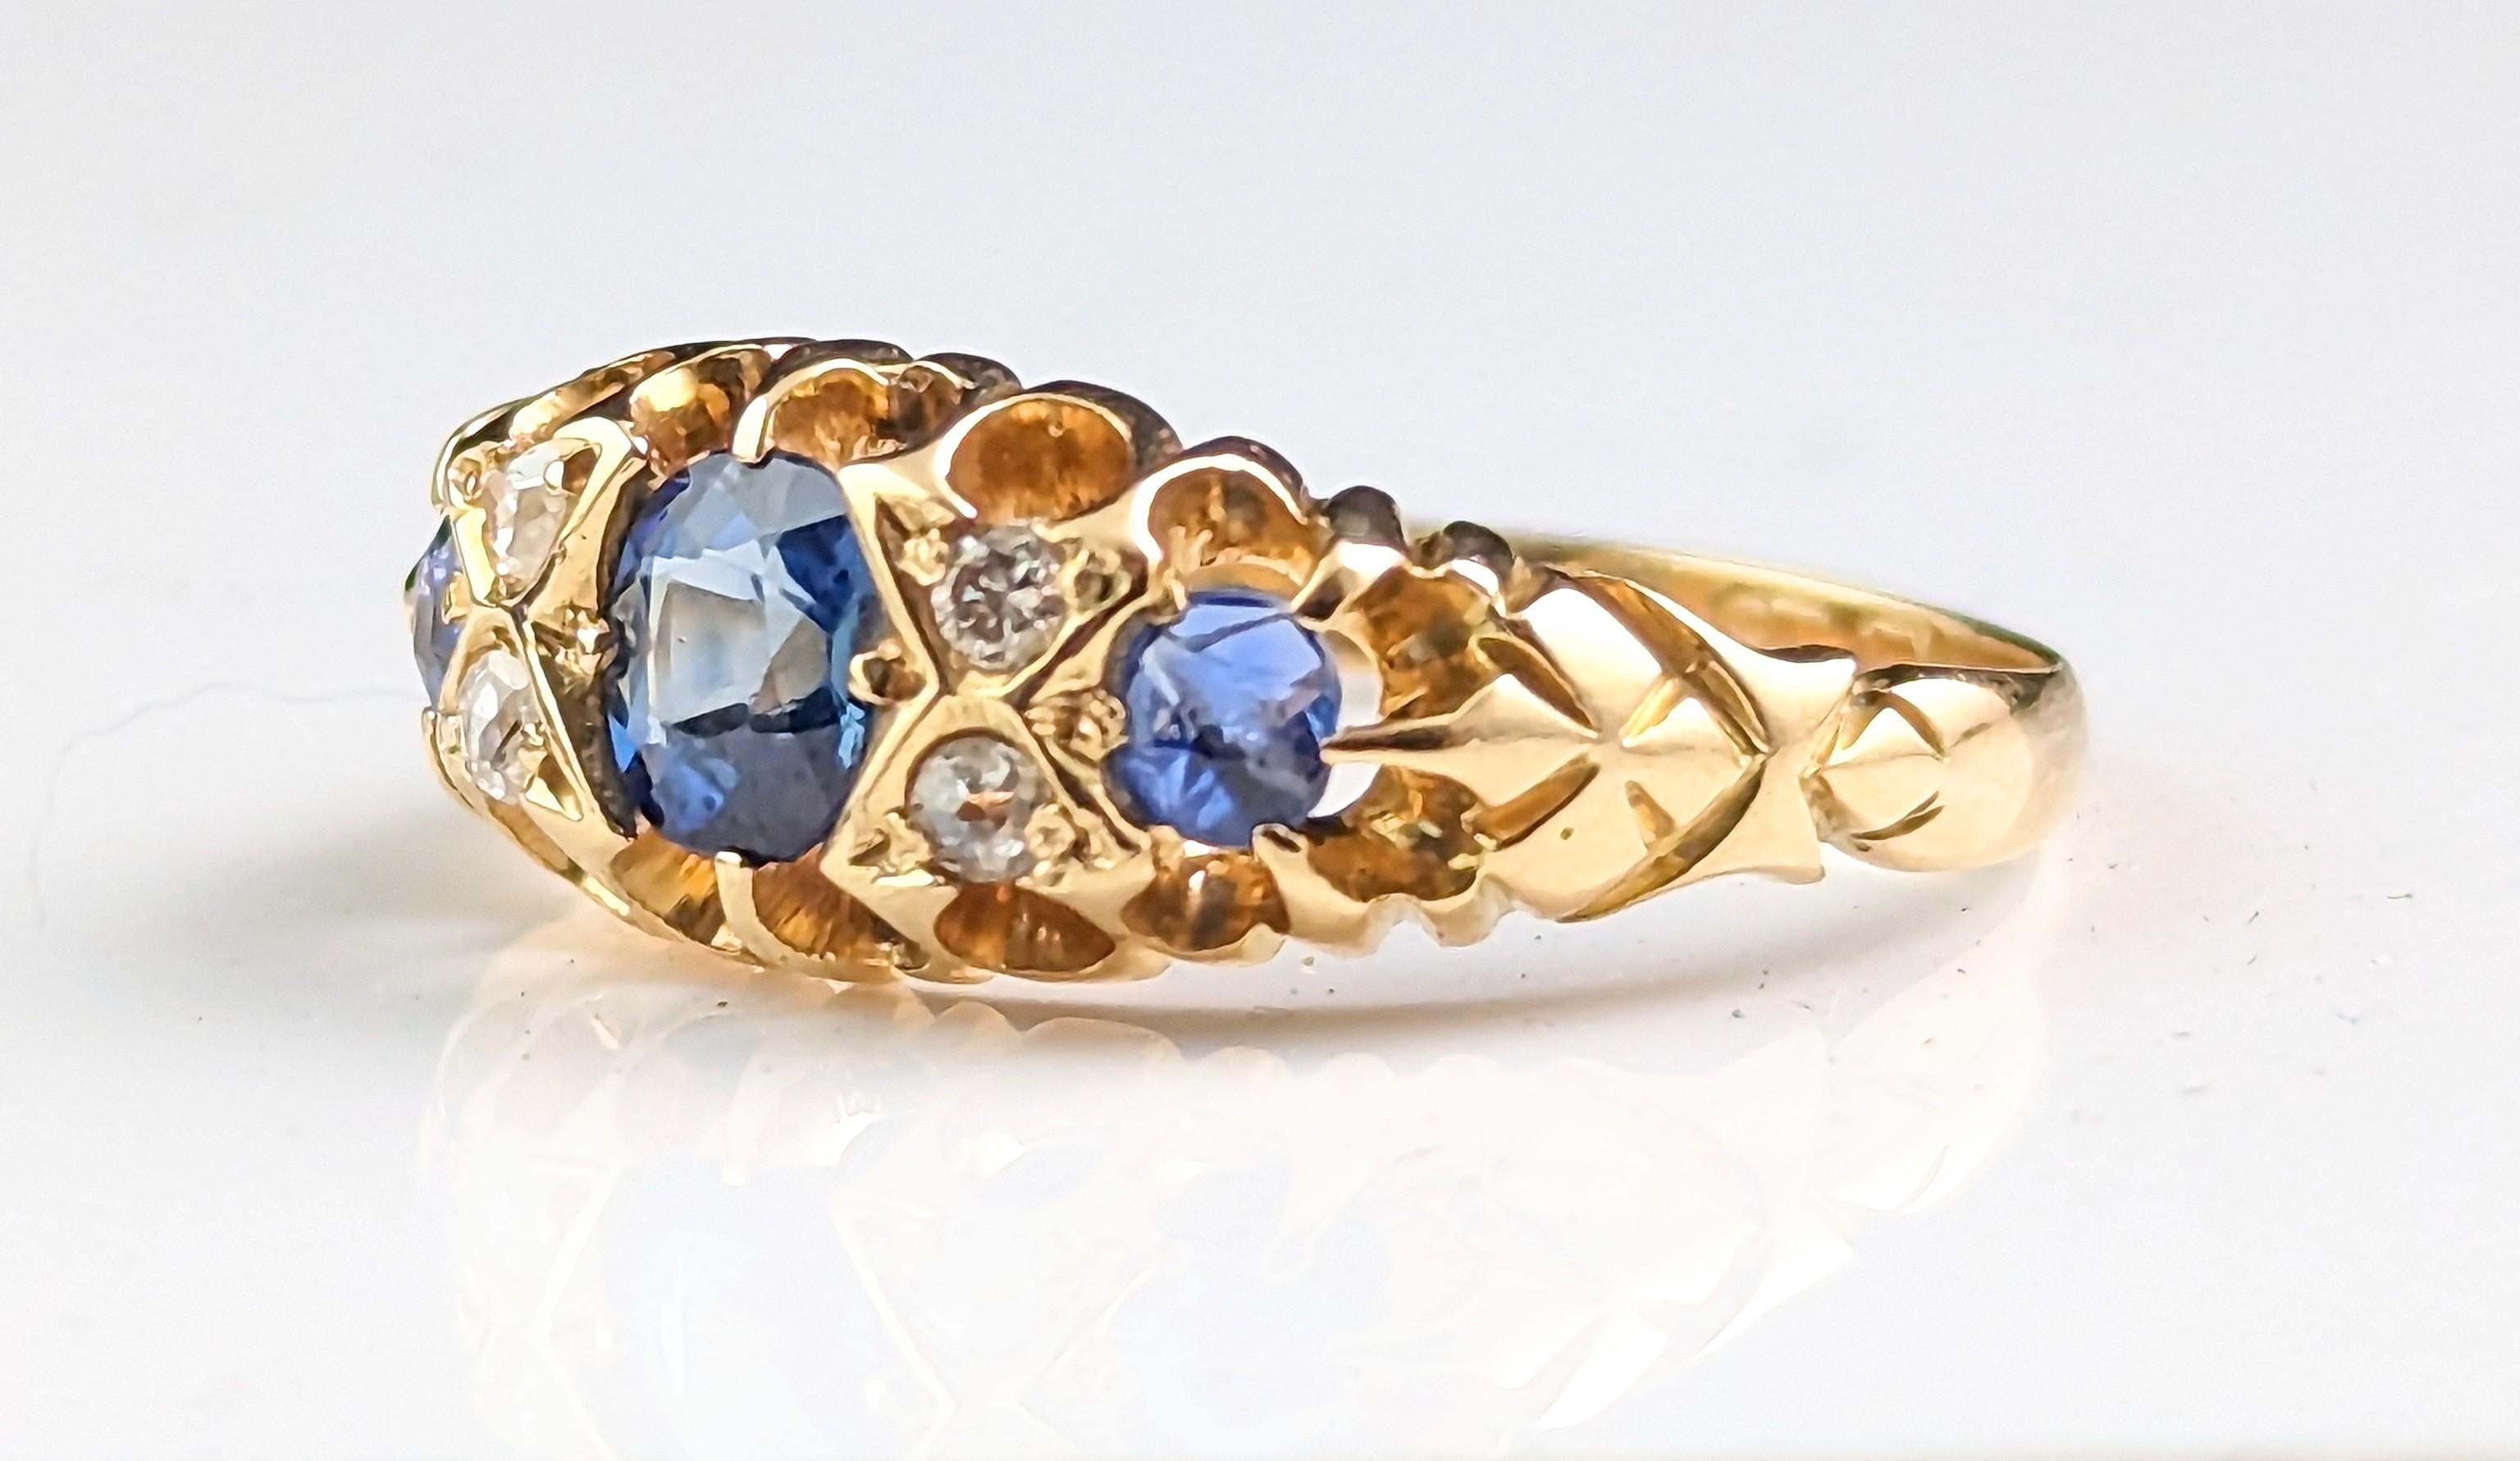 Antique Sapphire and Diamond Ring, 18k Yellow Gold, Victorian 5